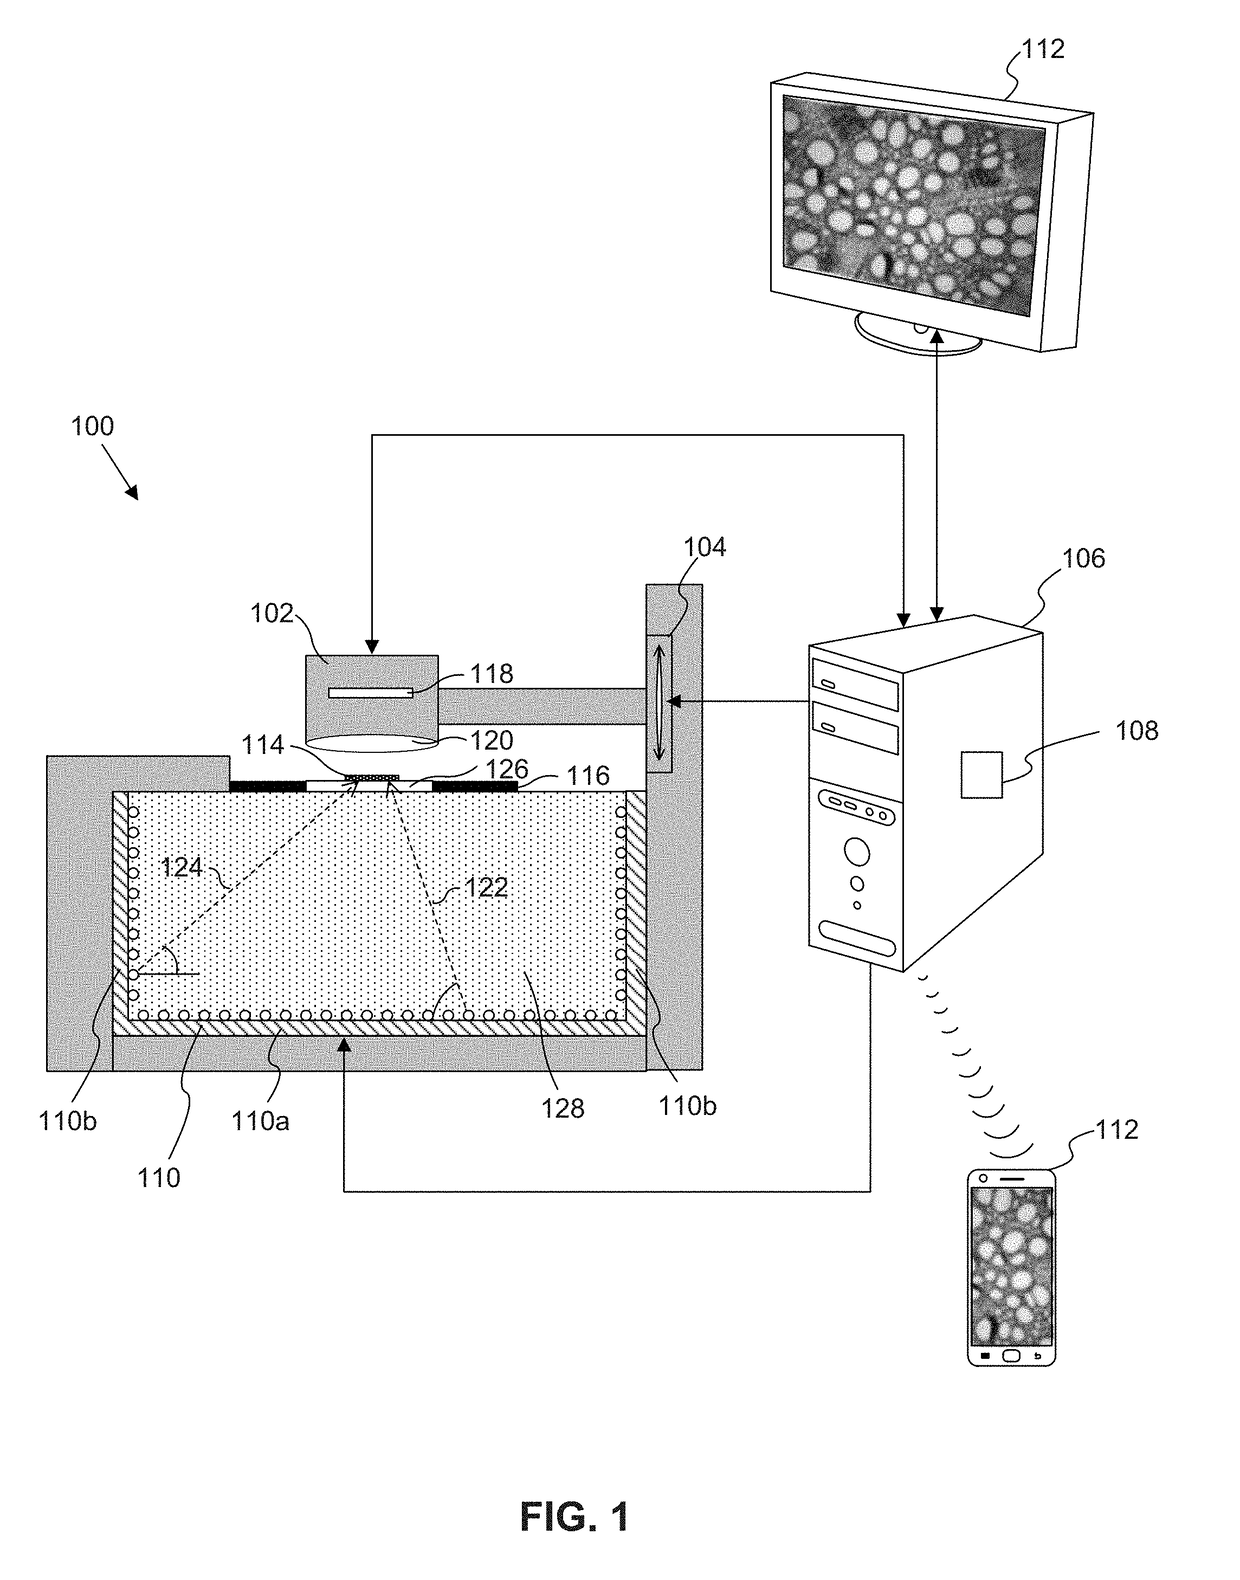 Microscope having a refractive index matching material